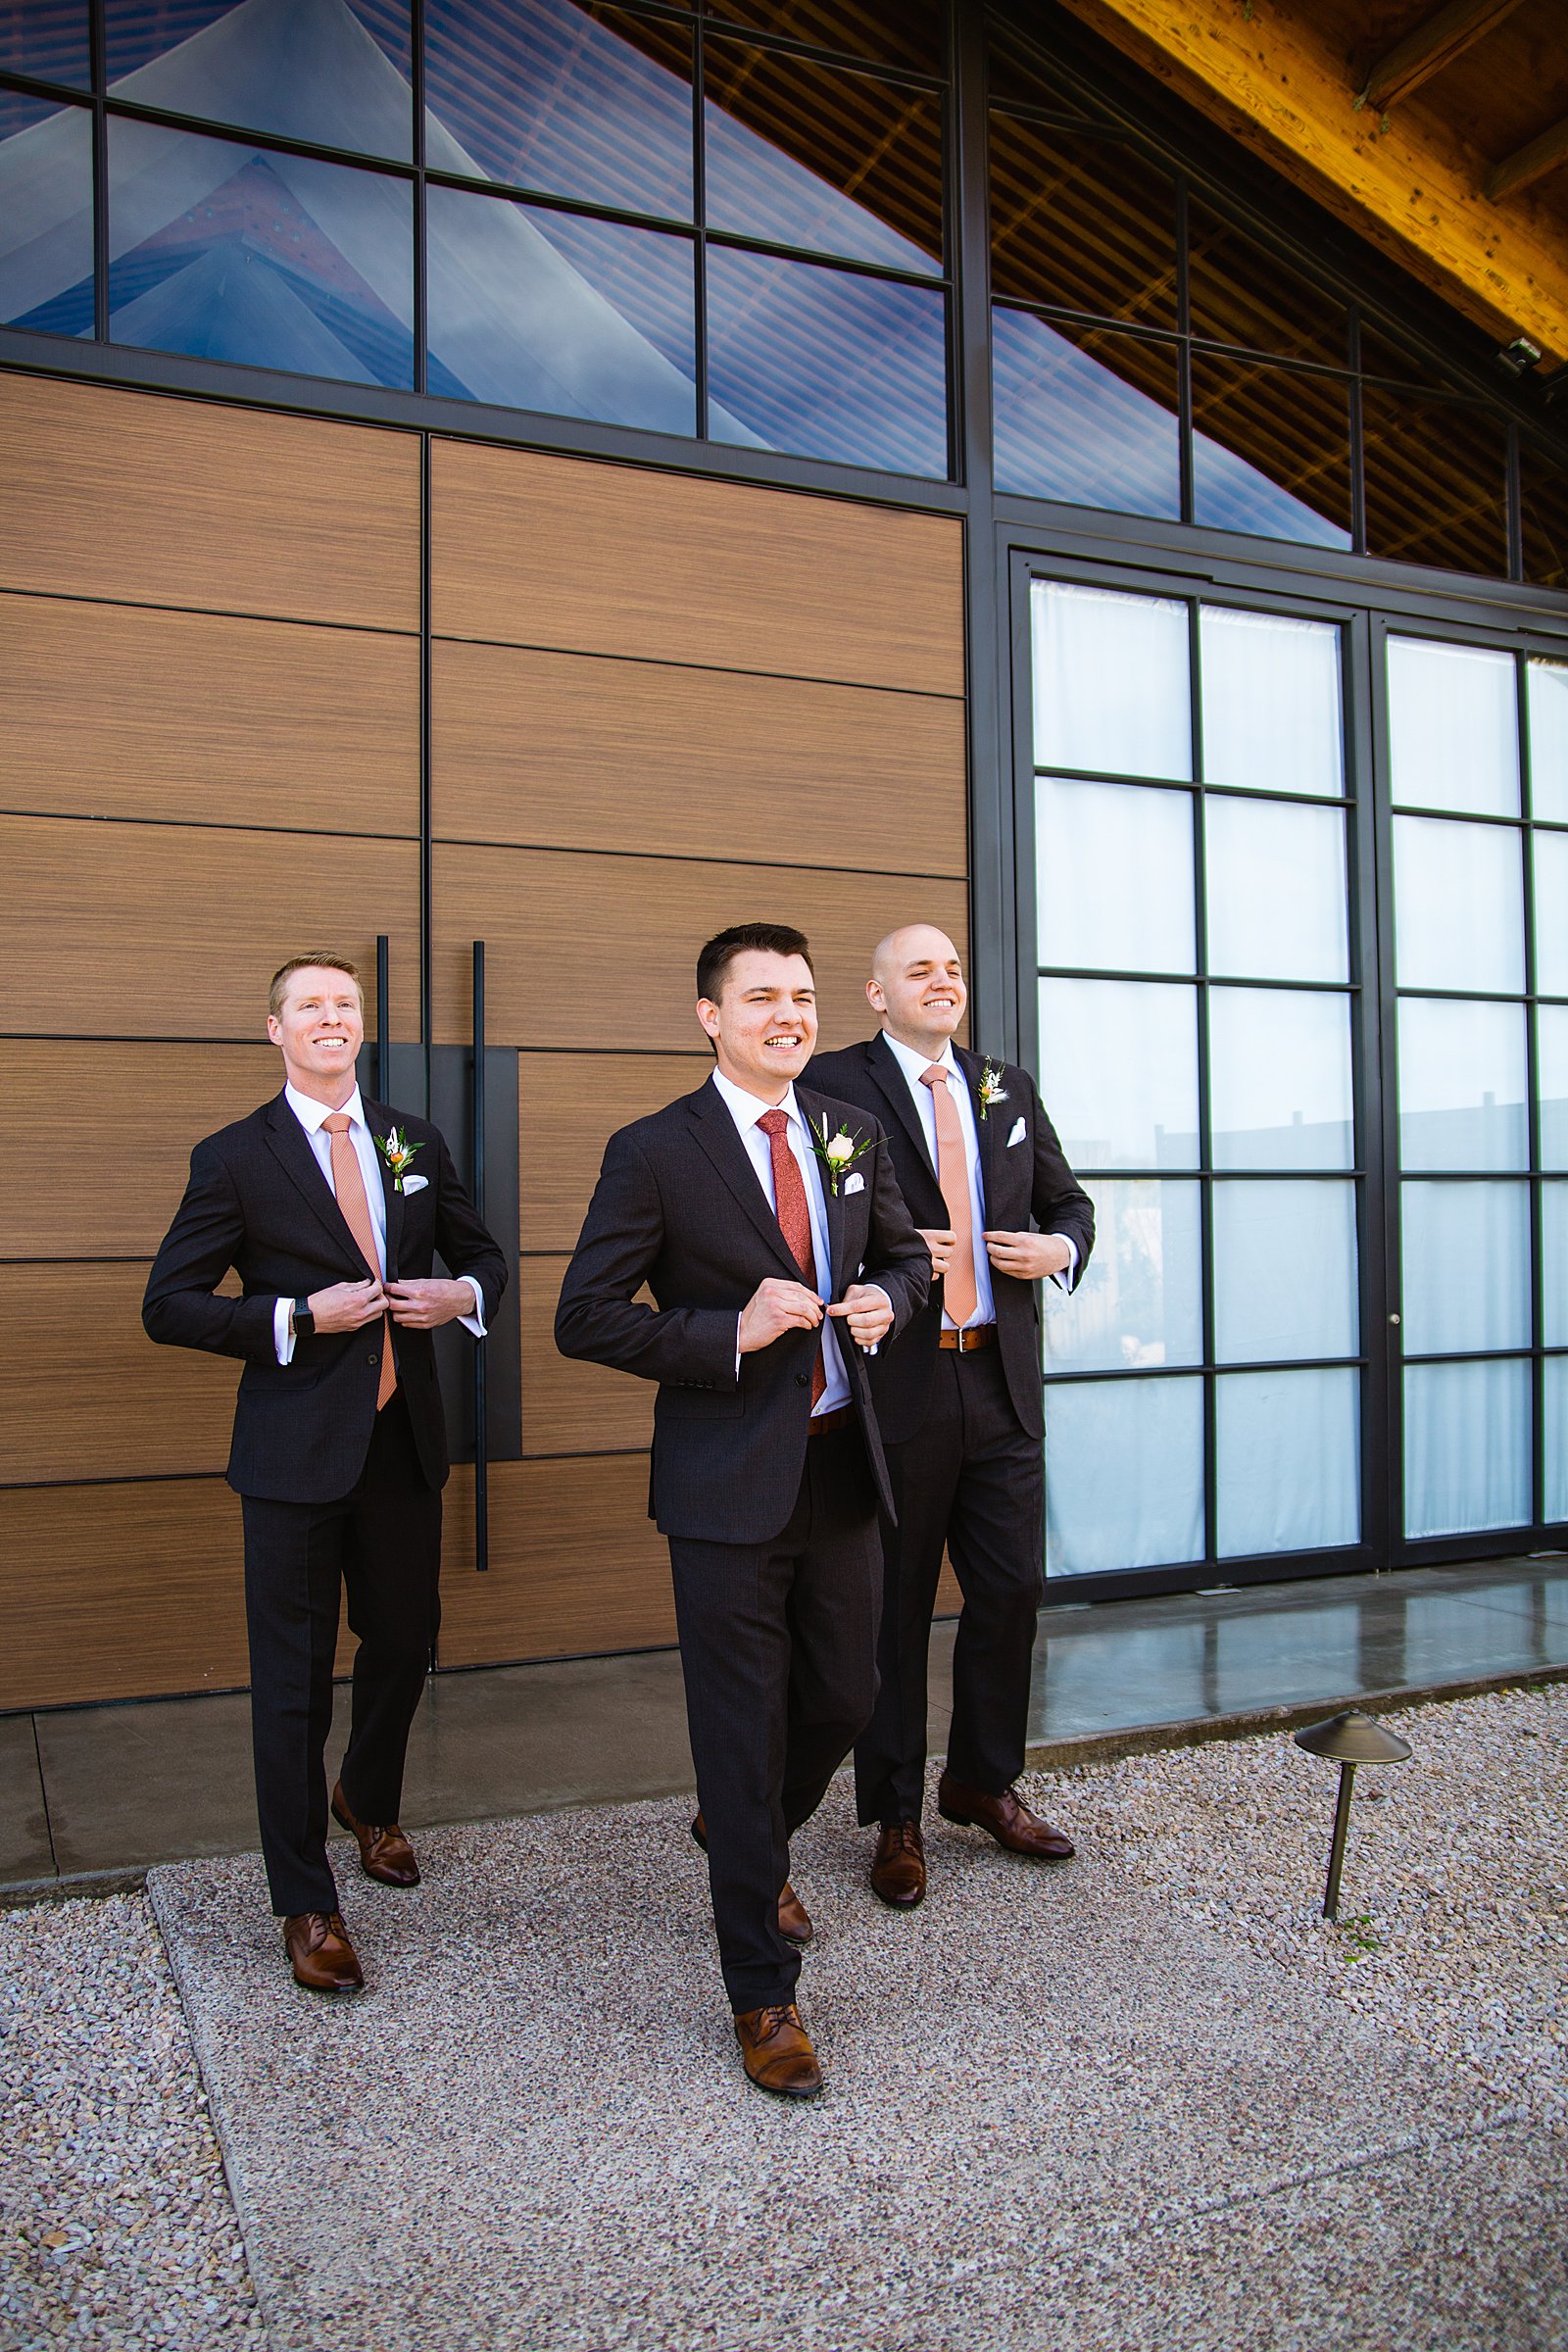 Groom and groomsmen walking together at a The Paseo wedding by Arizona wedding photographer PMA Photography.